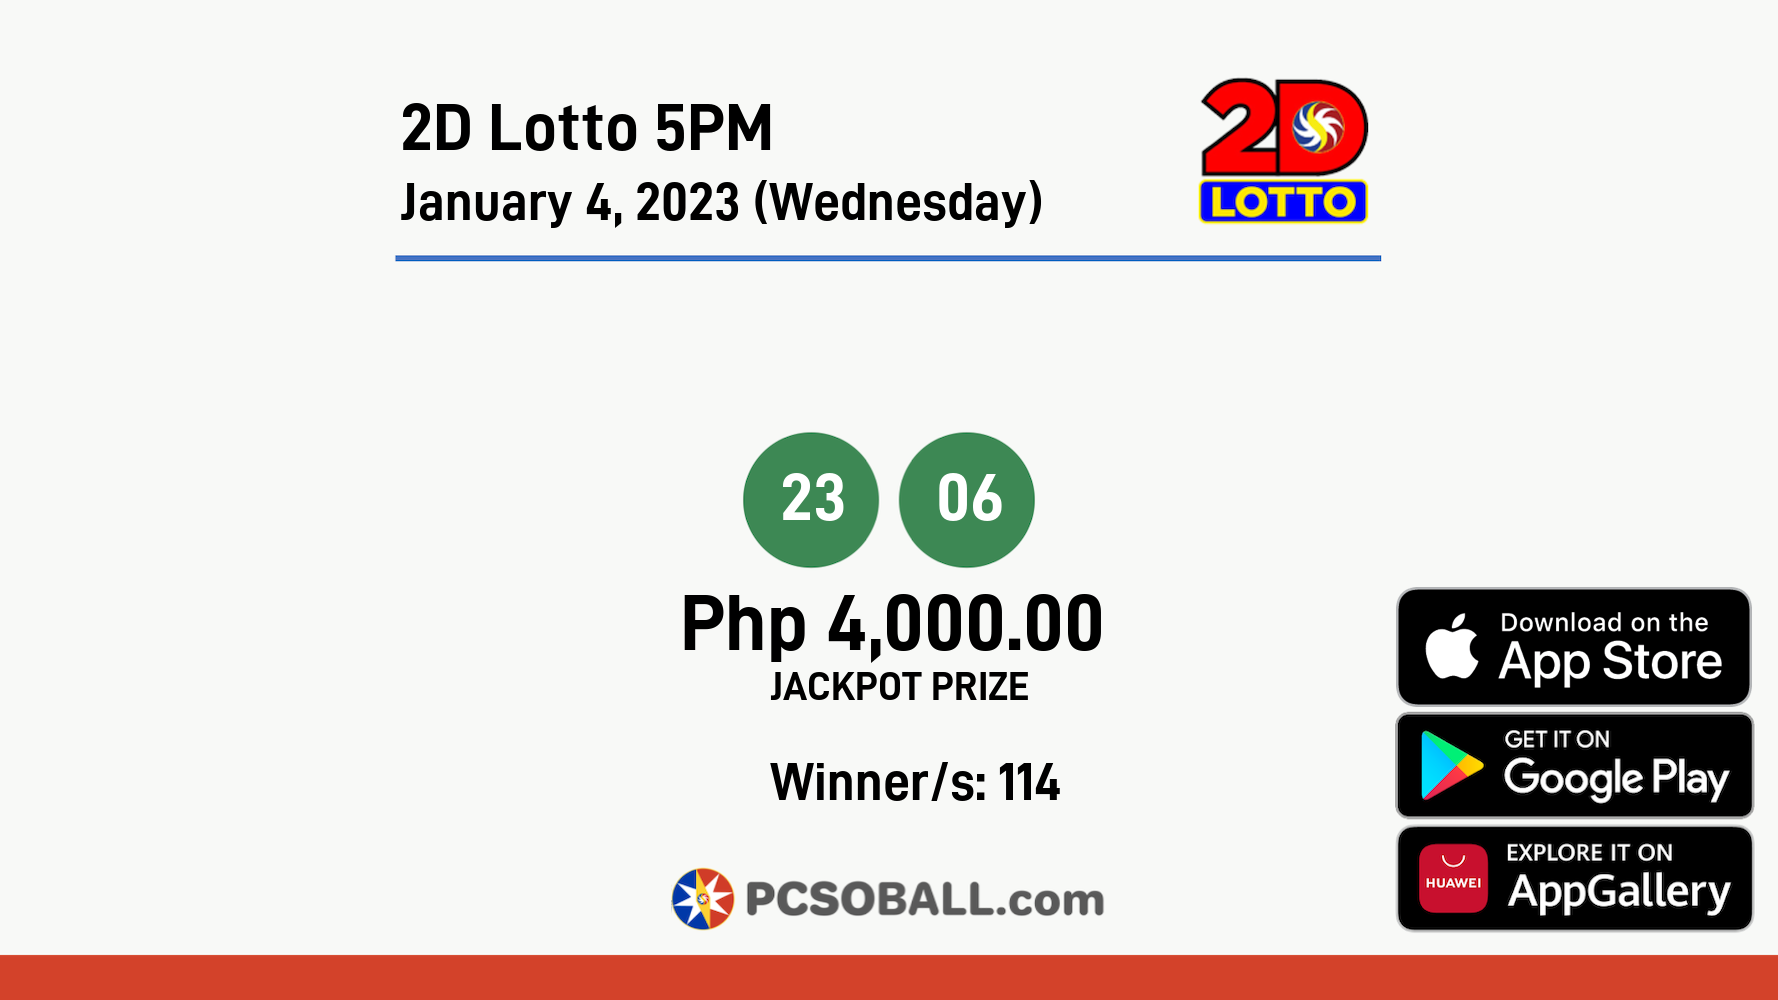 2D Lotto 5PM January 4, 2023 (Wednesday) Result